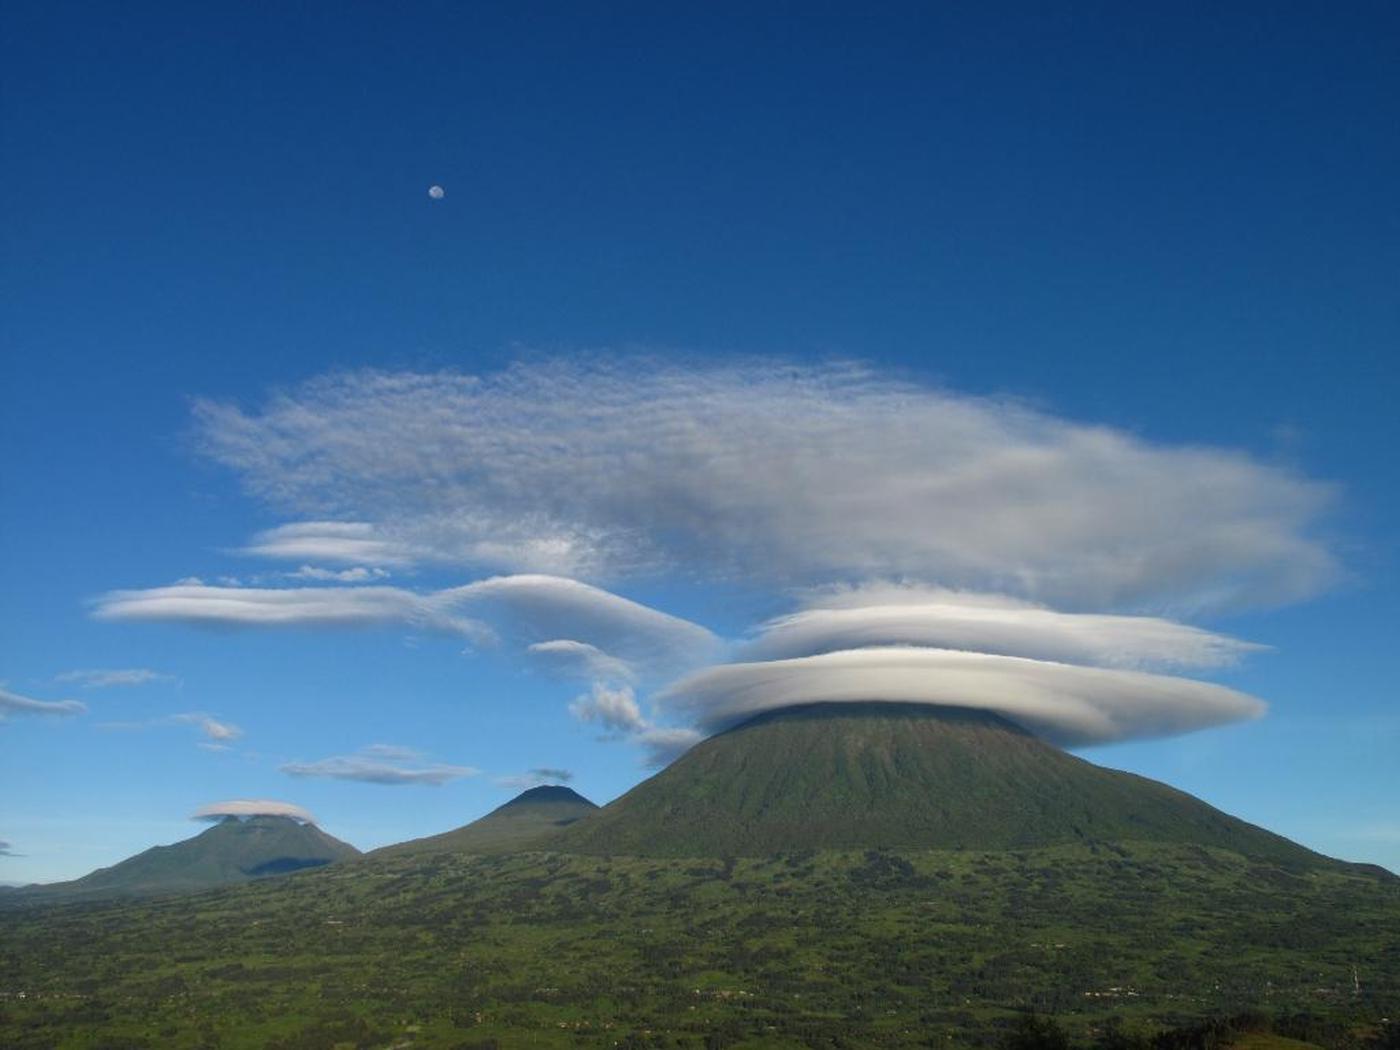 The Virunga Volcano with typical clouds on top, seen in Rwanda